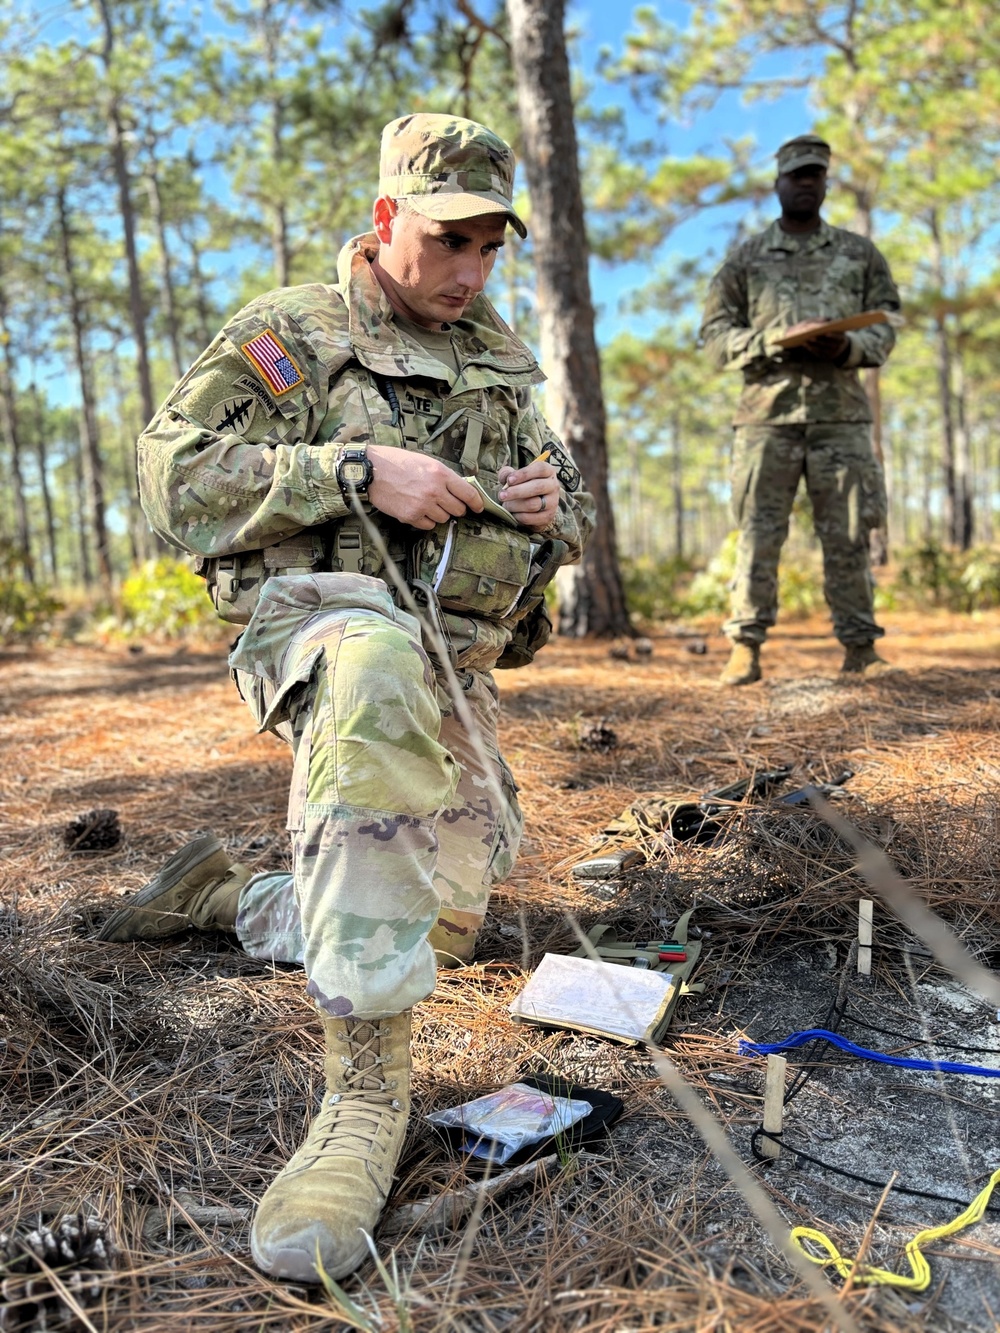 Unity in Training: Four Schools Under Campbell Battalion ROTC Converge at Fort Liberty for Pivotal Fall Exercise, Setting Stage for Spring FTX and Summer Training